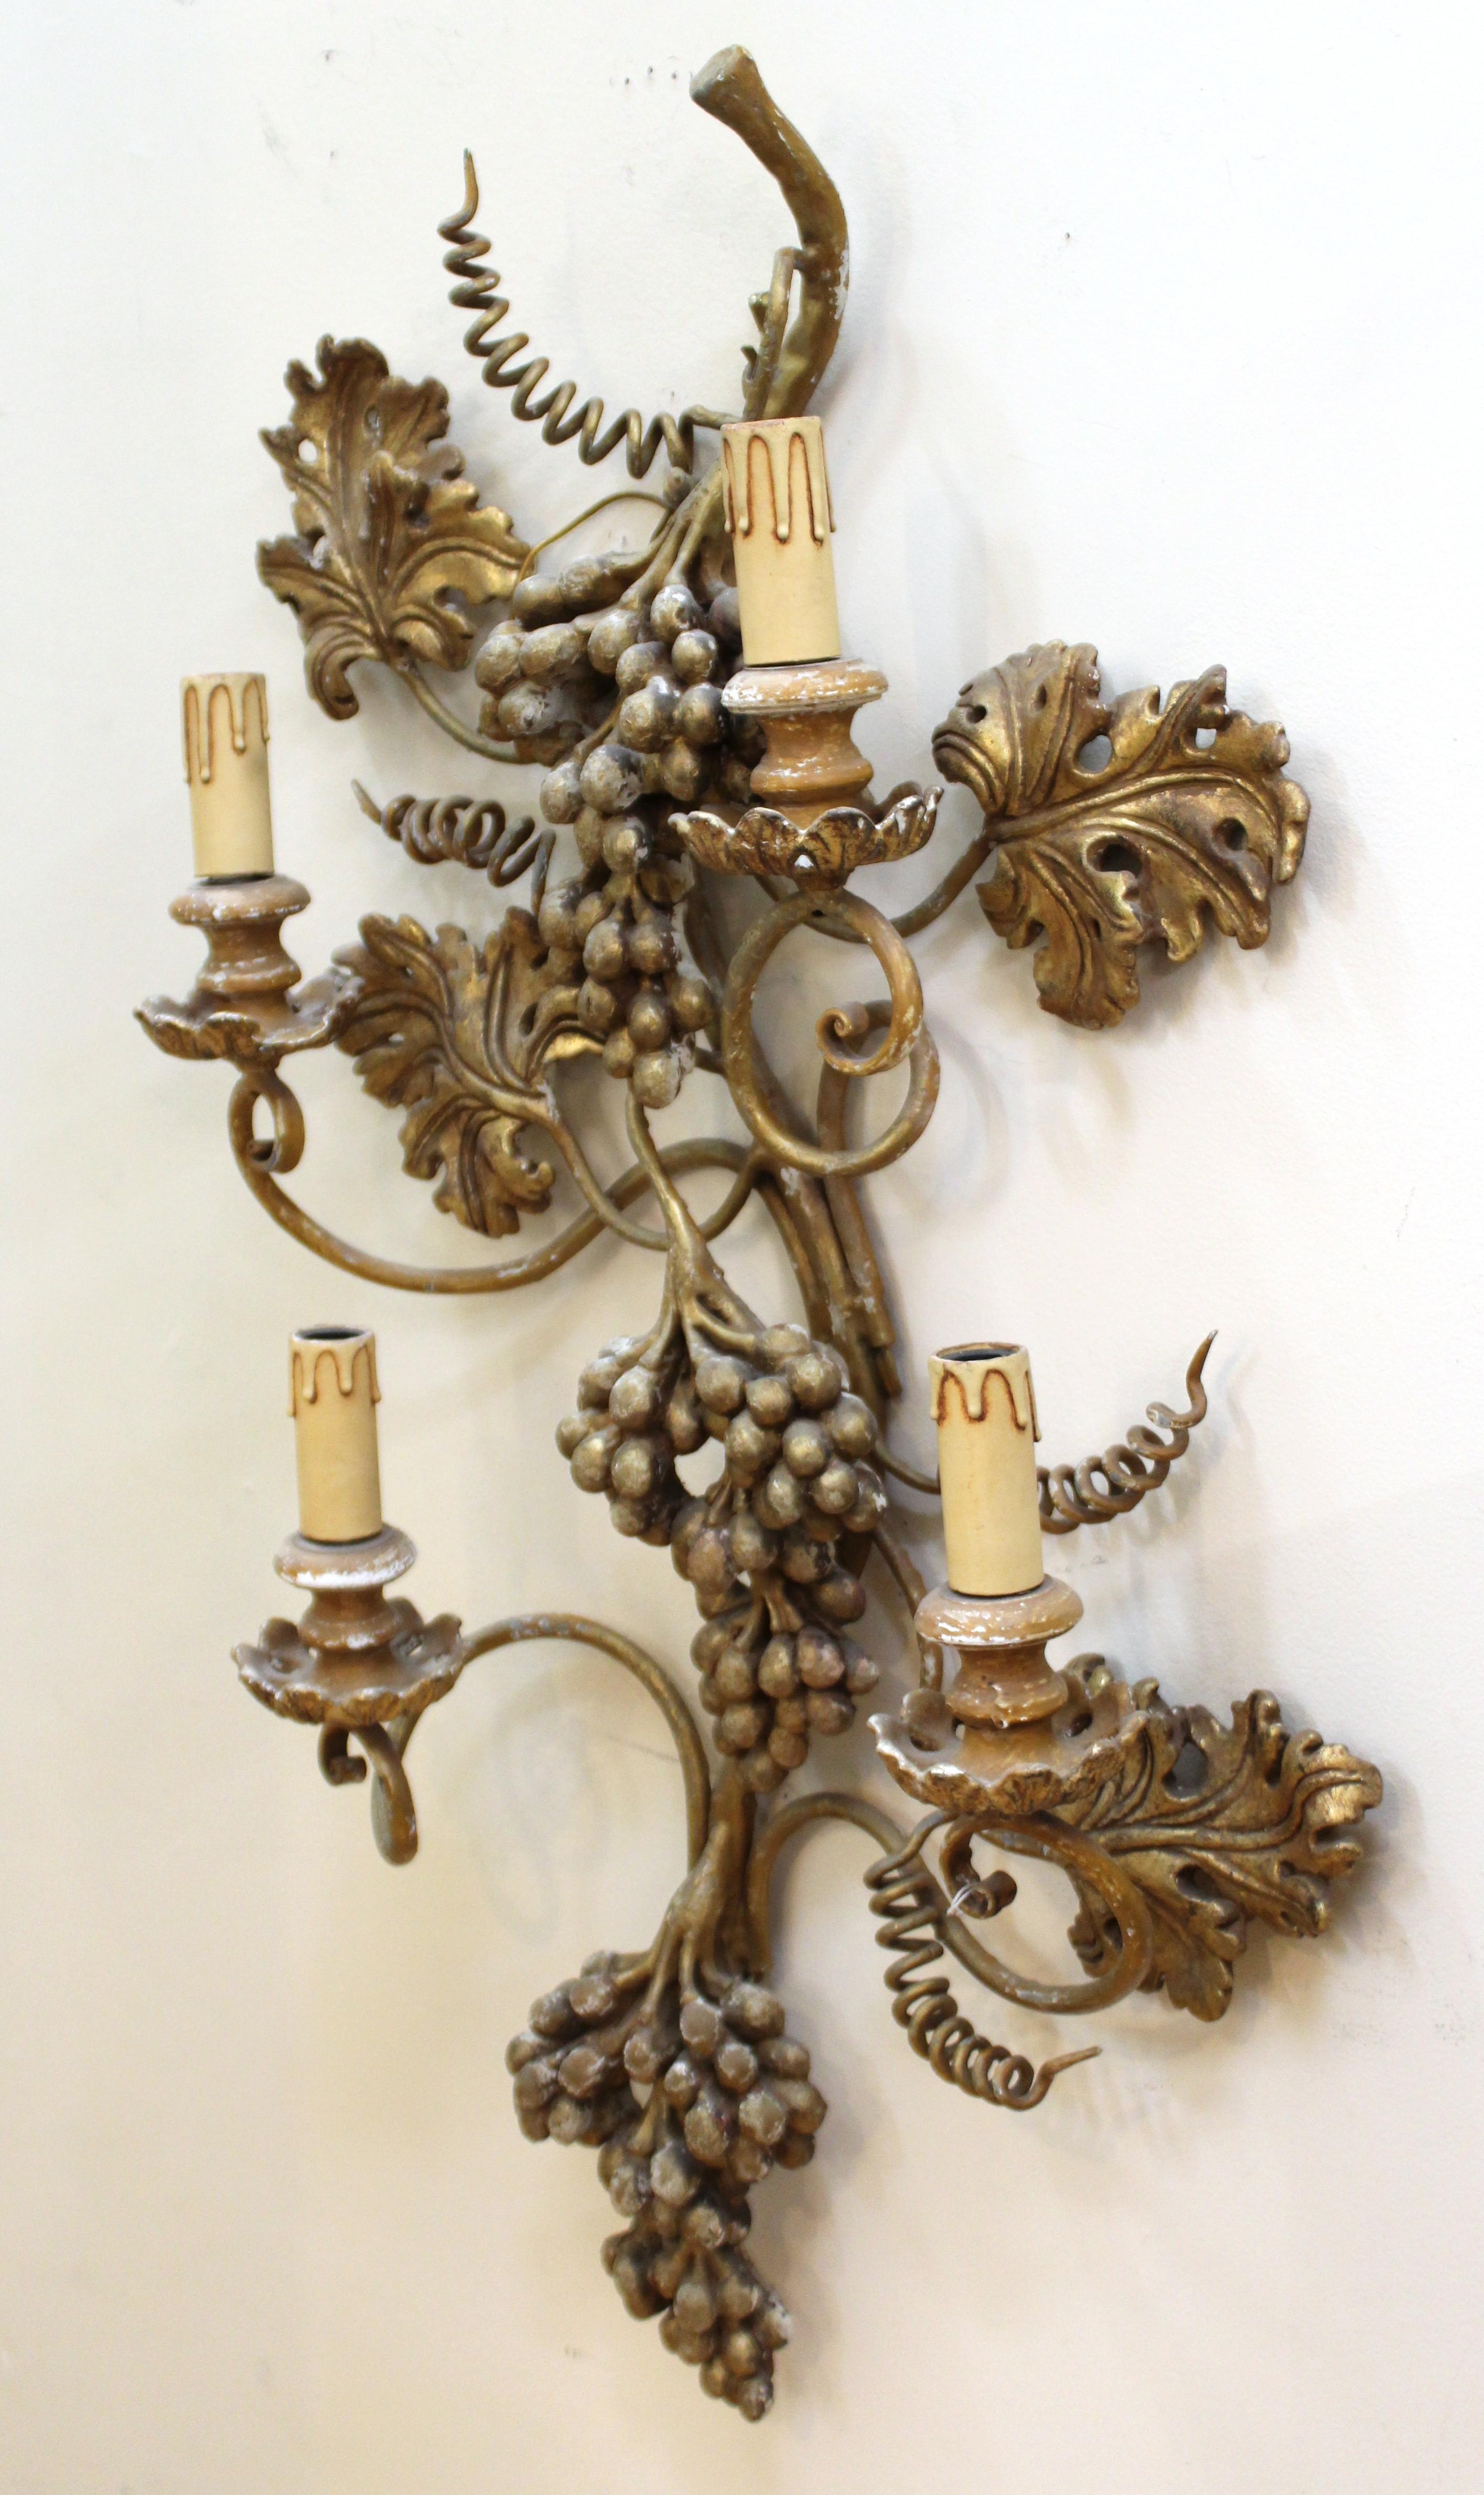 Italian Hollywood Regency wall sconce with a Florentine grapes style, made in the mid-1950s in Italy with wood and hand painted plaster. The piece has four light sources and is in great vintage condition with age-appropriate wear to the plaster and